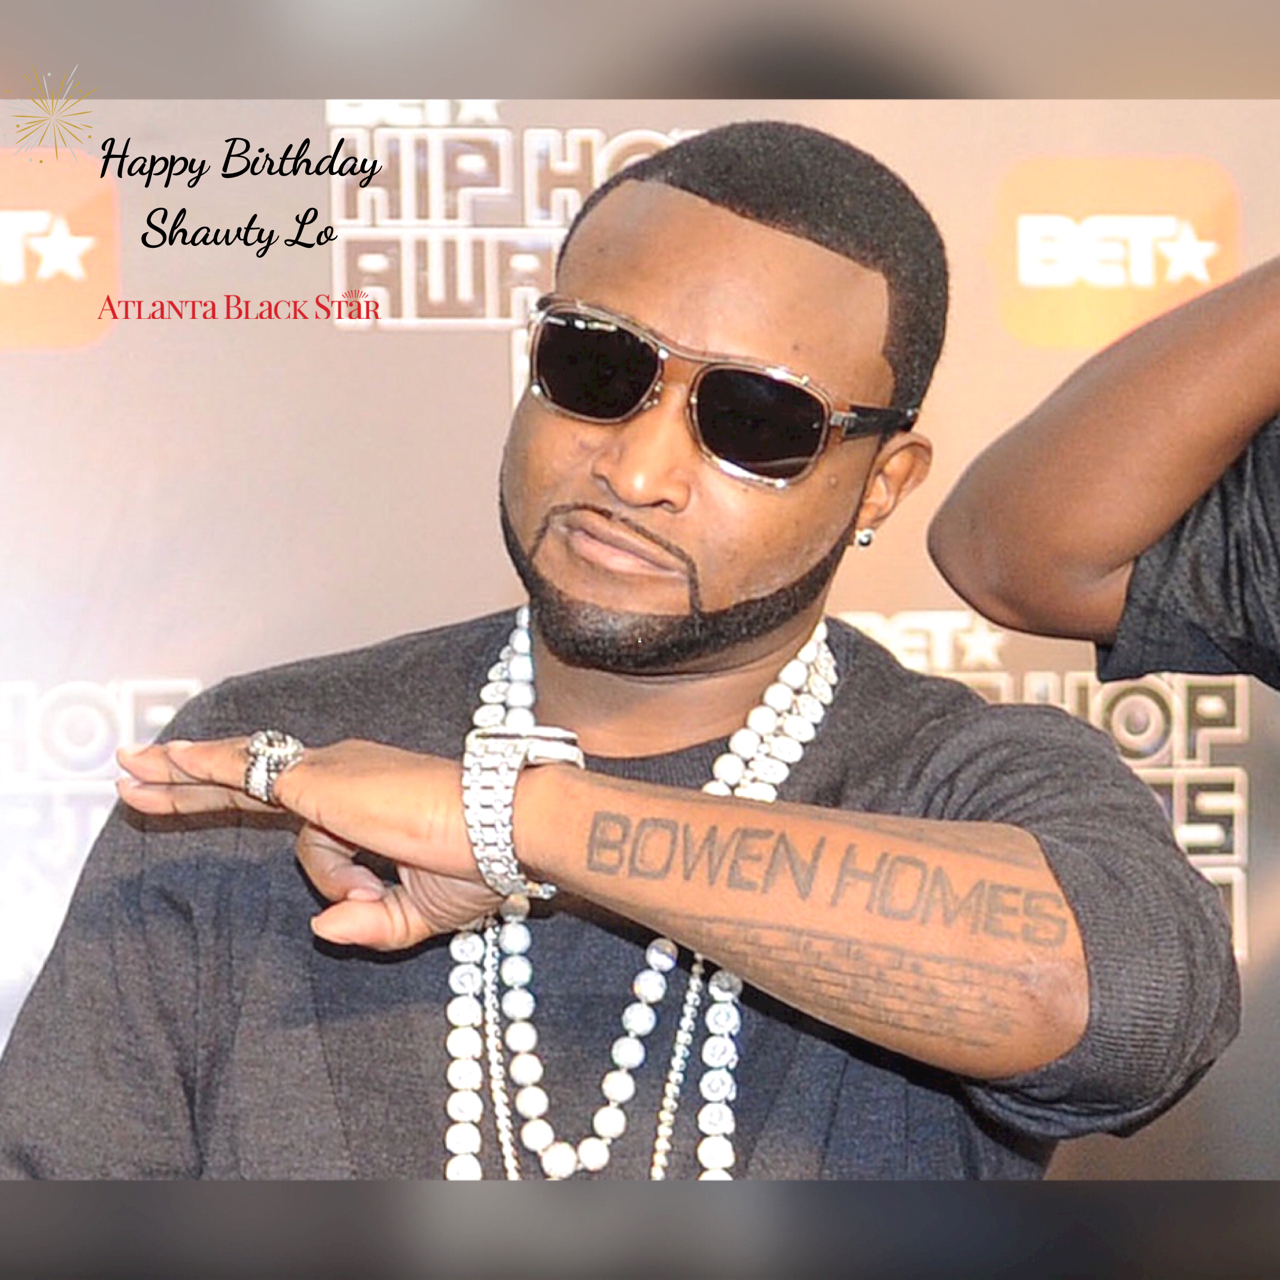 Happy birthday and rest in peace to Atlanta legend, rapper Shawty Lo! Prayers up  